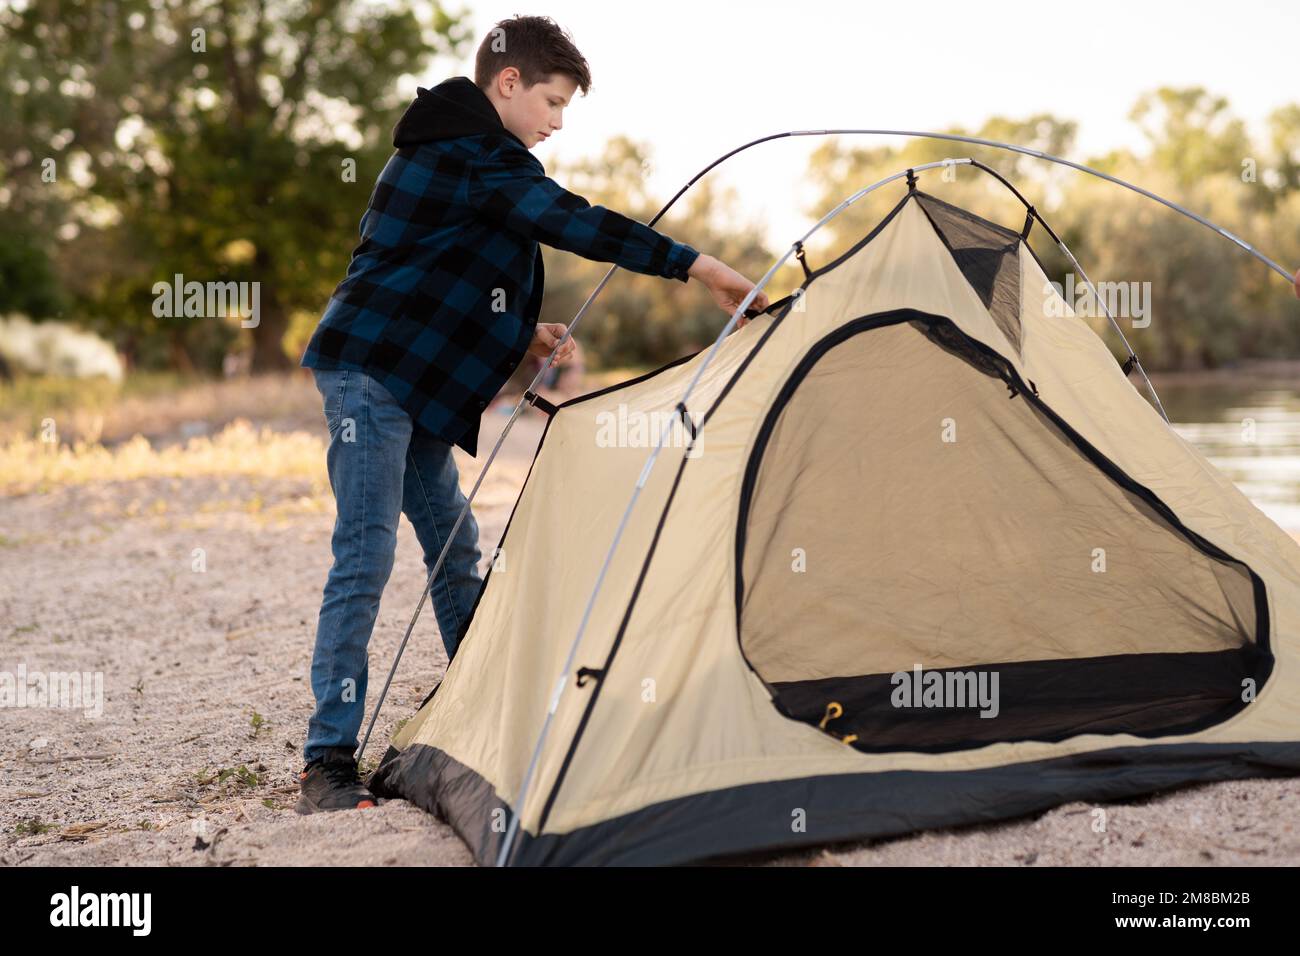 Camping people outdoor lifestyle tourists, summer river. boy installing tent. Natural children education Stock Photo